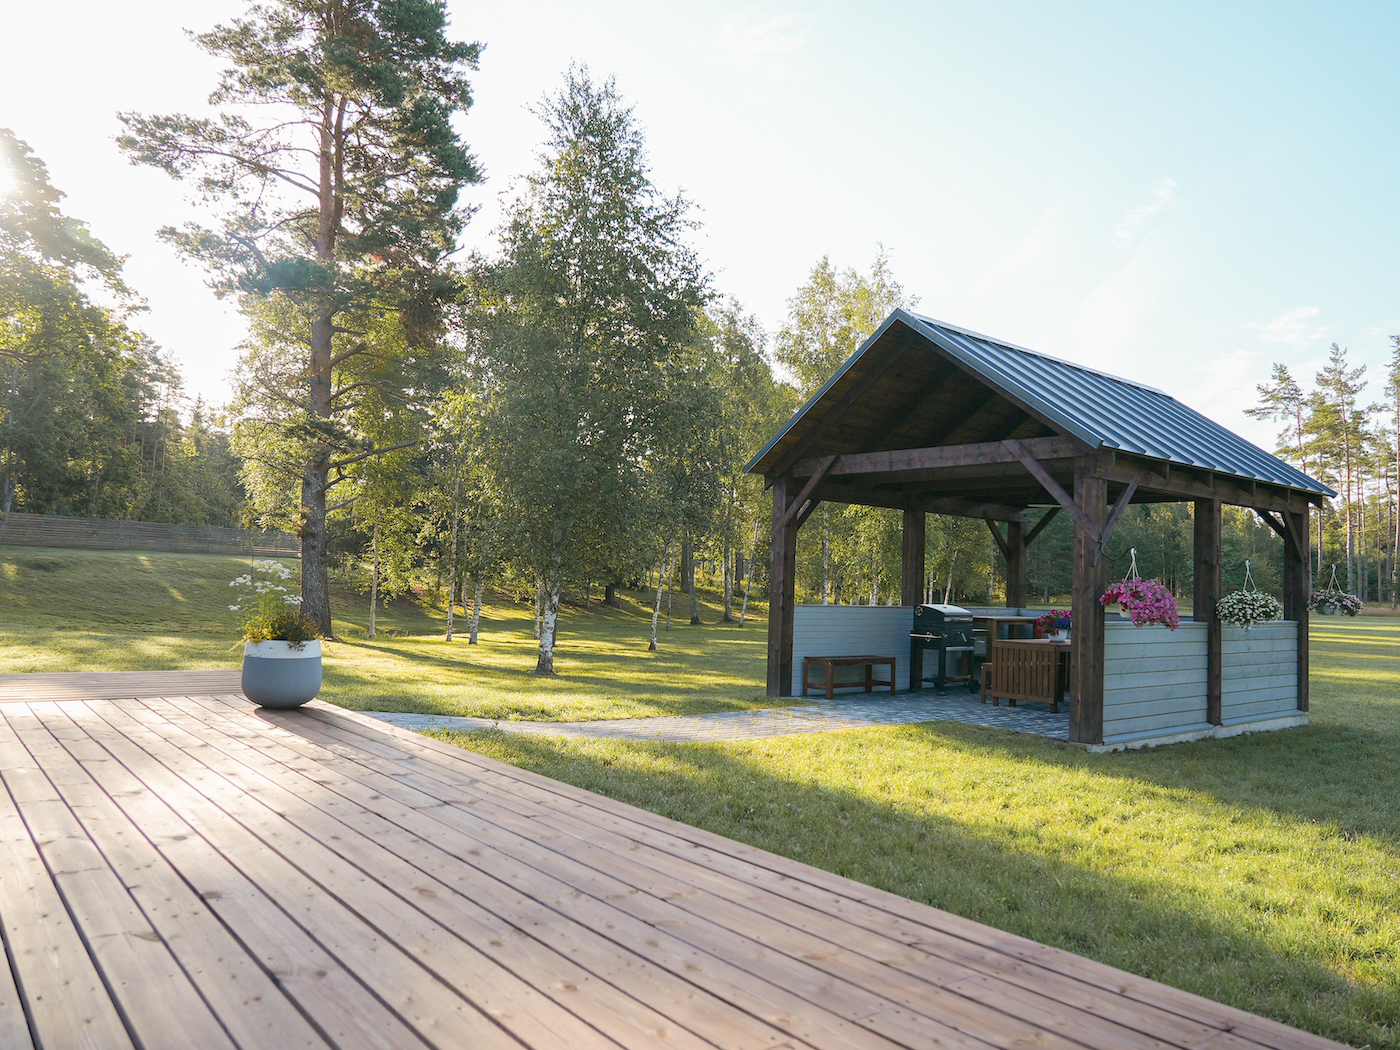 The Peaceful Vacation luxury accommodation holiday home with sauna in Saaremaa near the lake, best holiday homes in Estonia